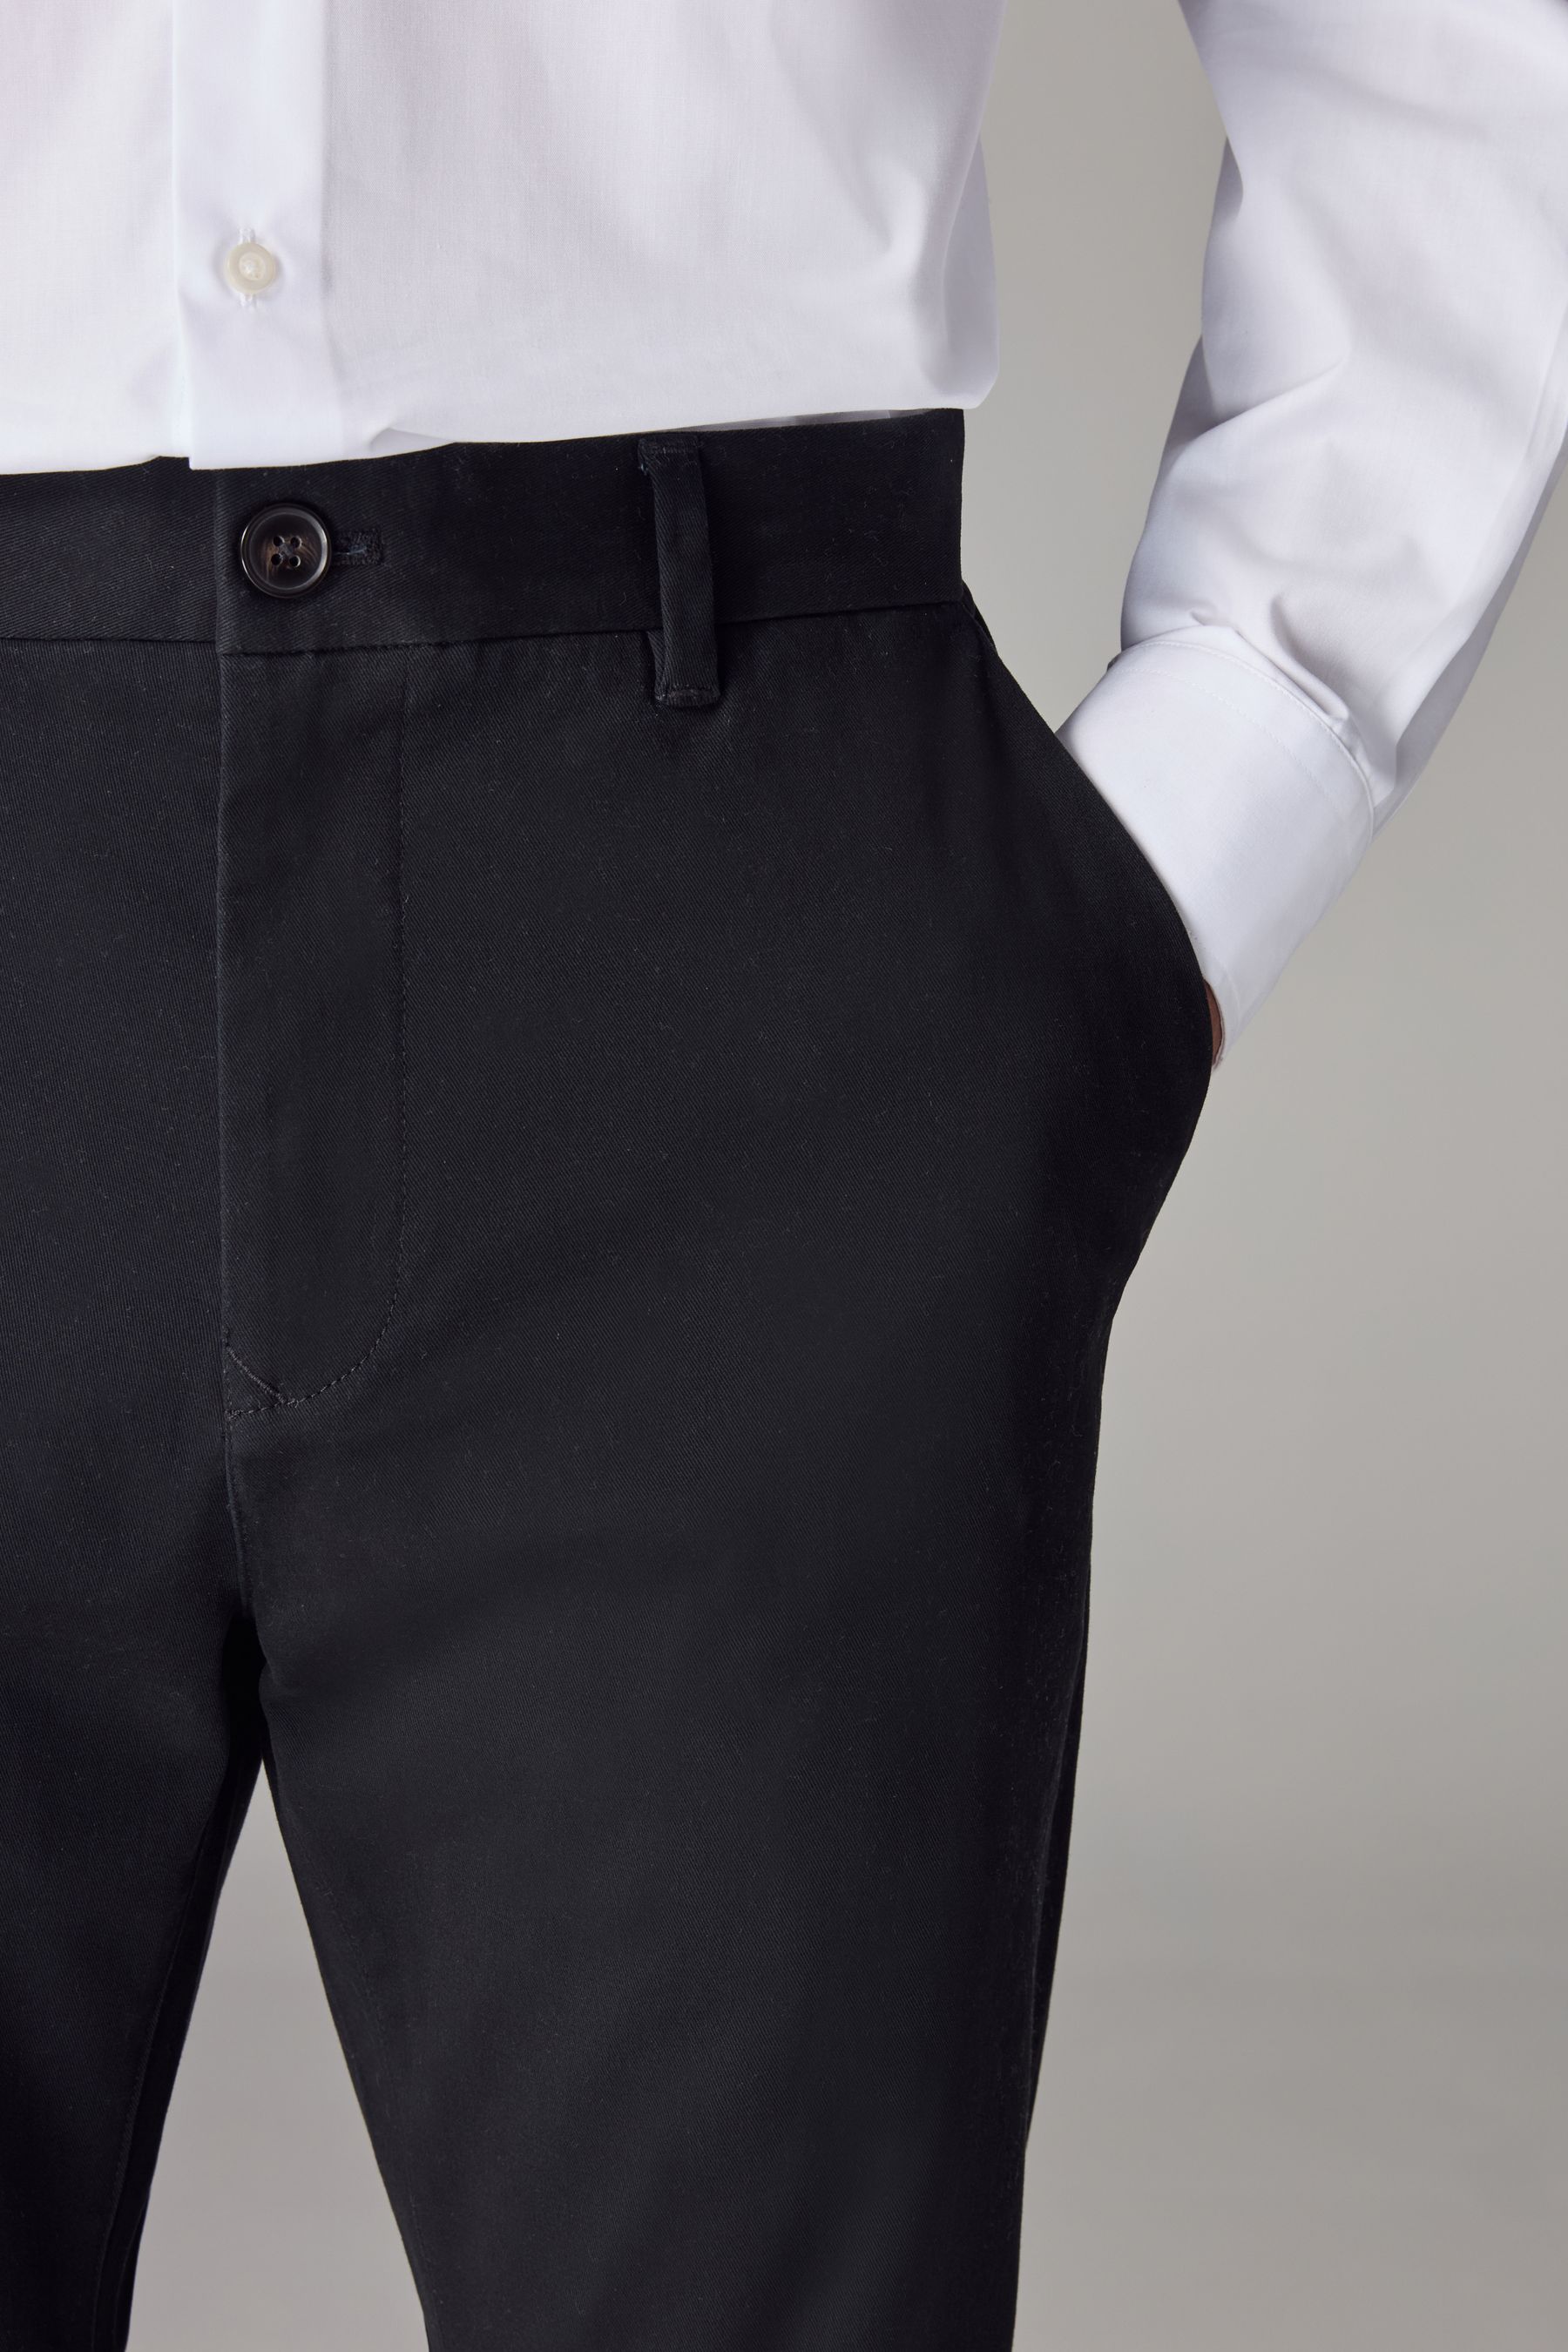 Buy Black Skinny Fit Stretch Chino Trousers from the Next UK online shop